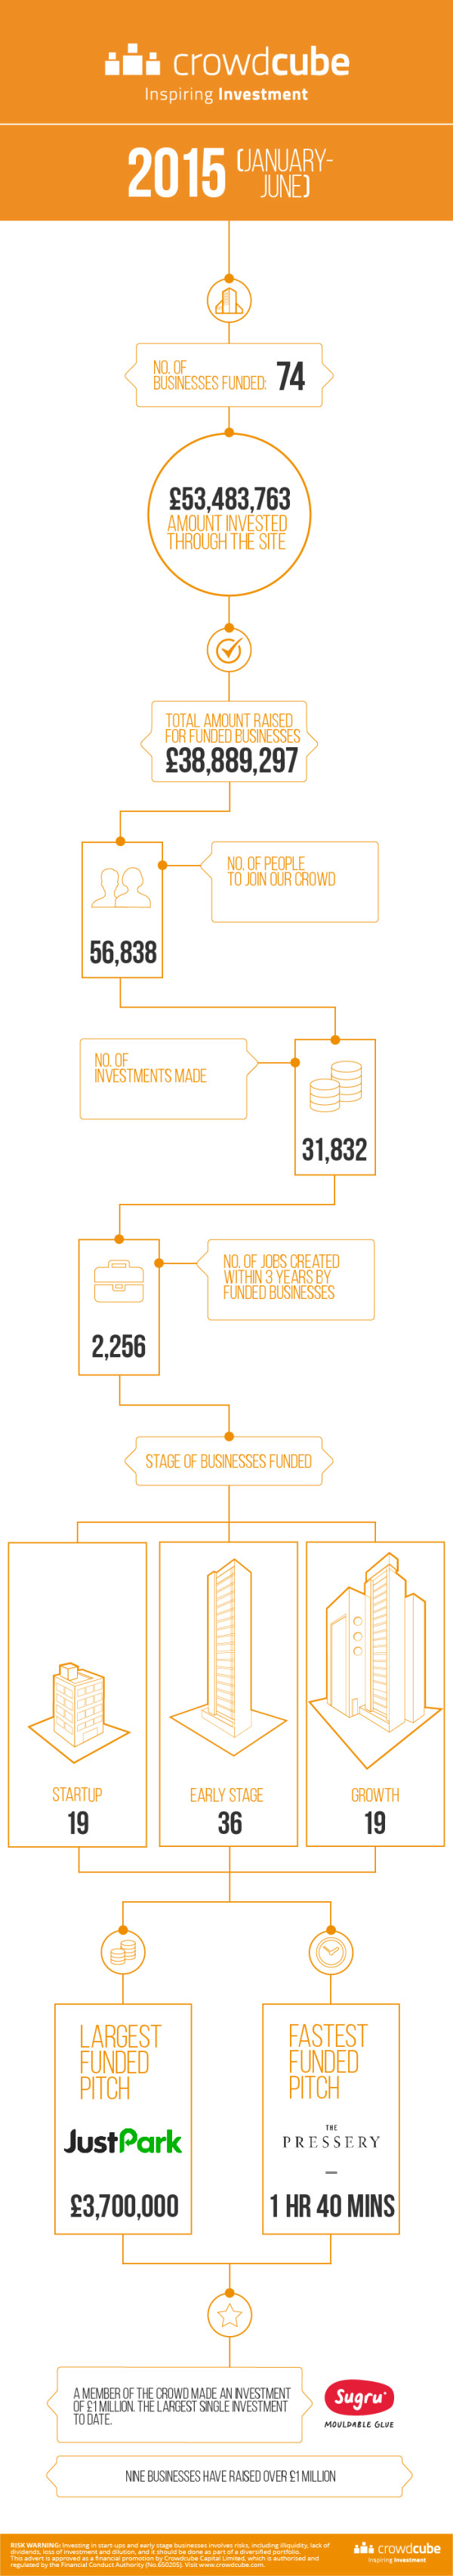 crowdcube, infographie crowdfunding